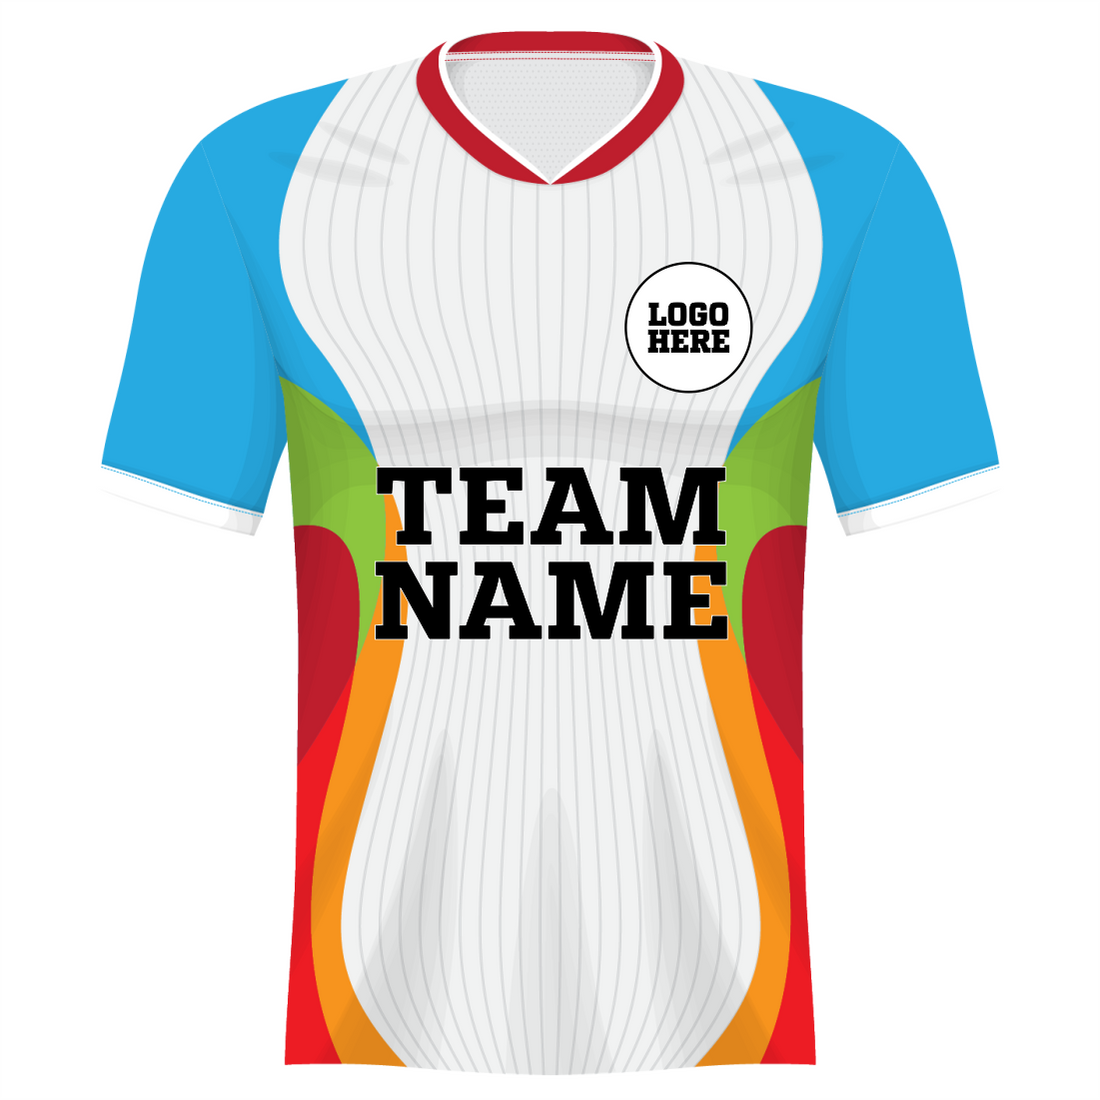 NEXT PRINT All Over Printed Customized Sublimation T-Shirt Unisex Sports Jersey Player Name & Number, Team Name And Logo. 1958477938